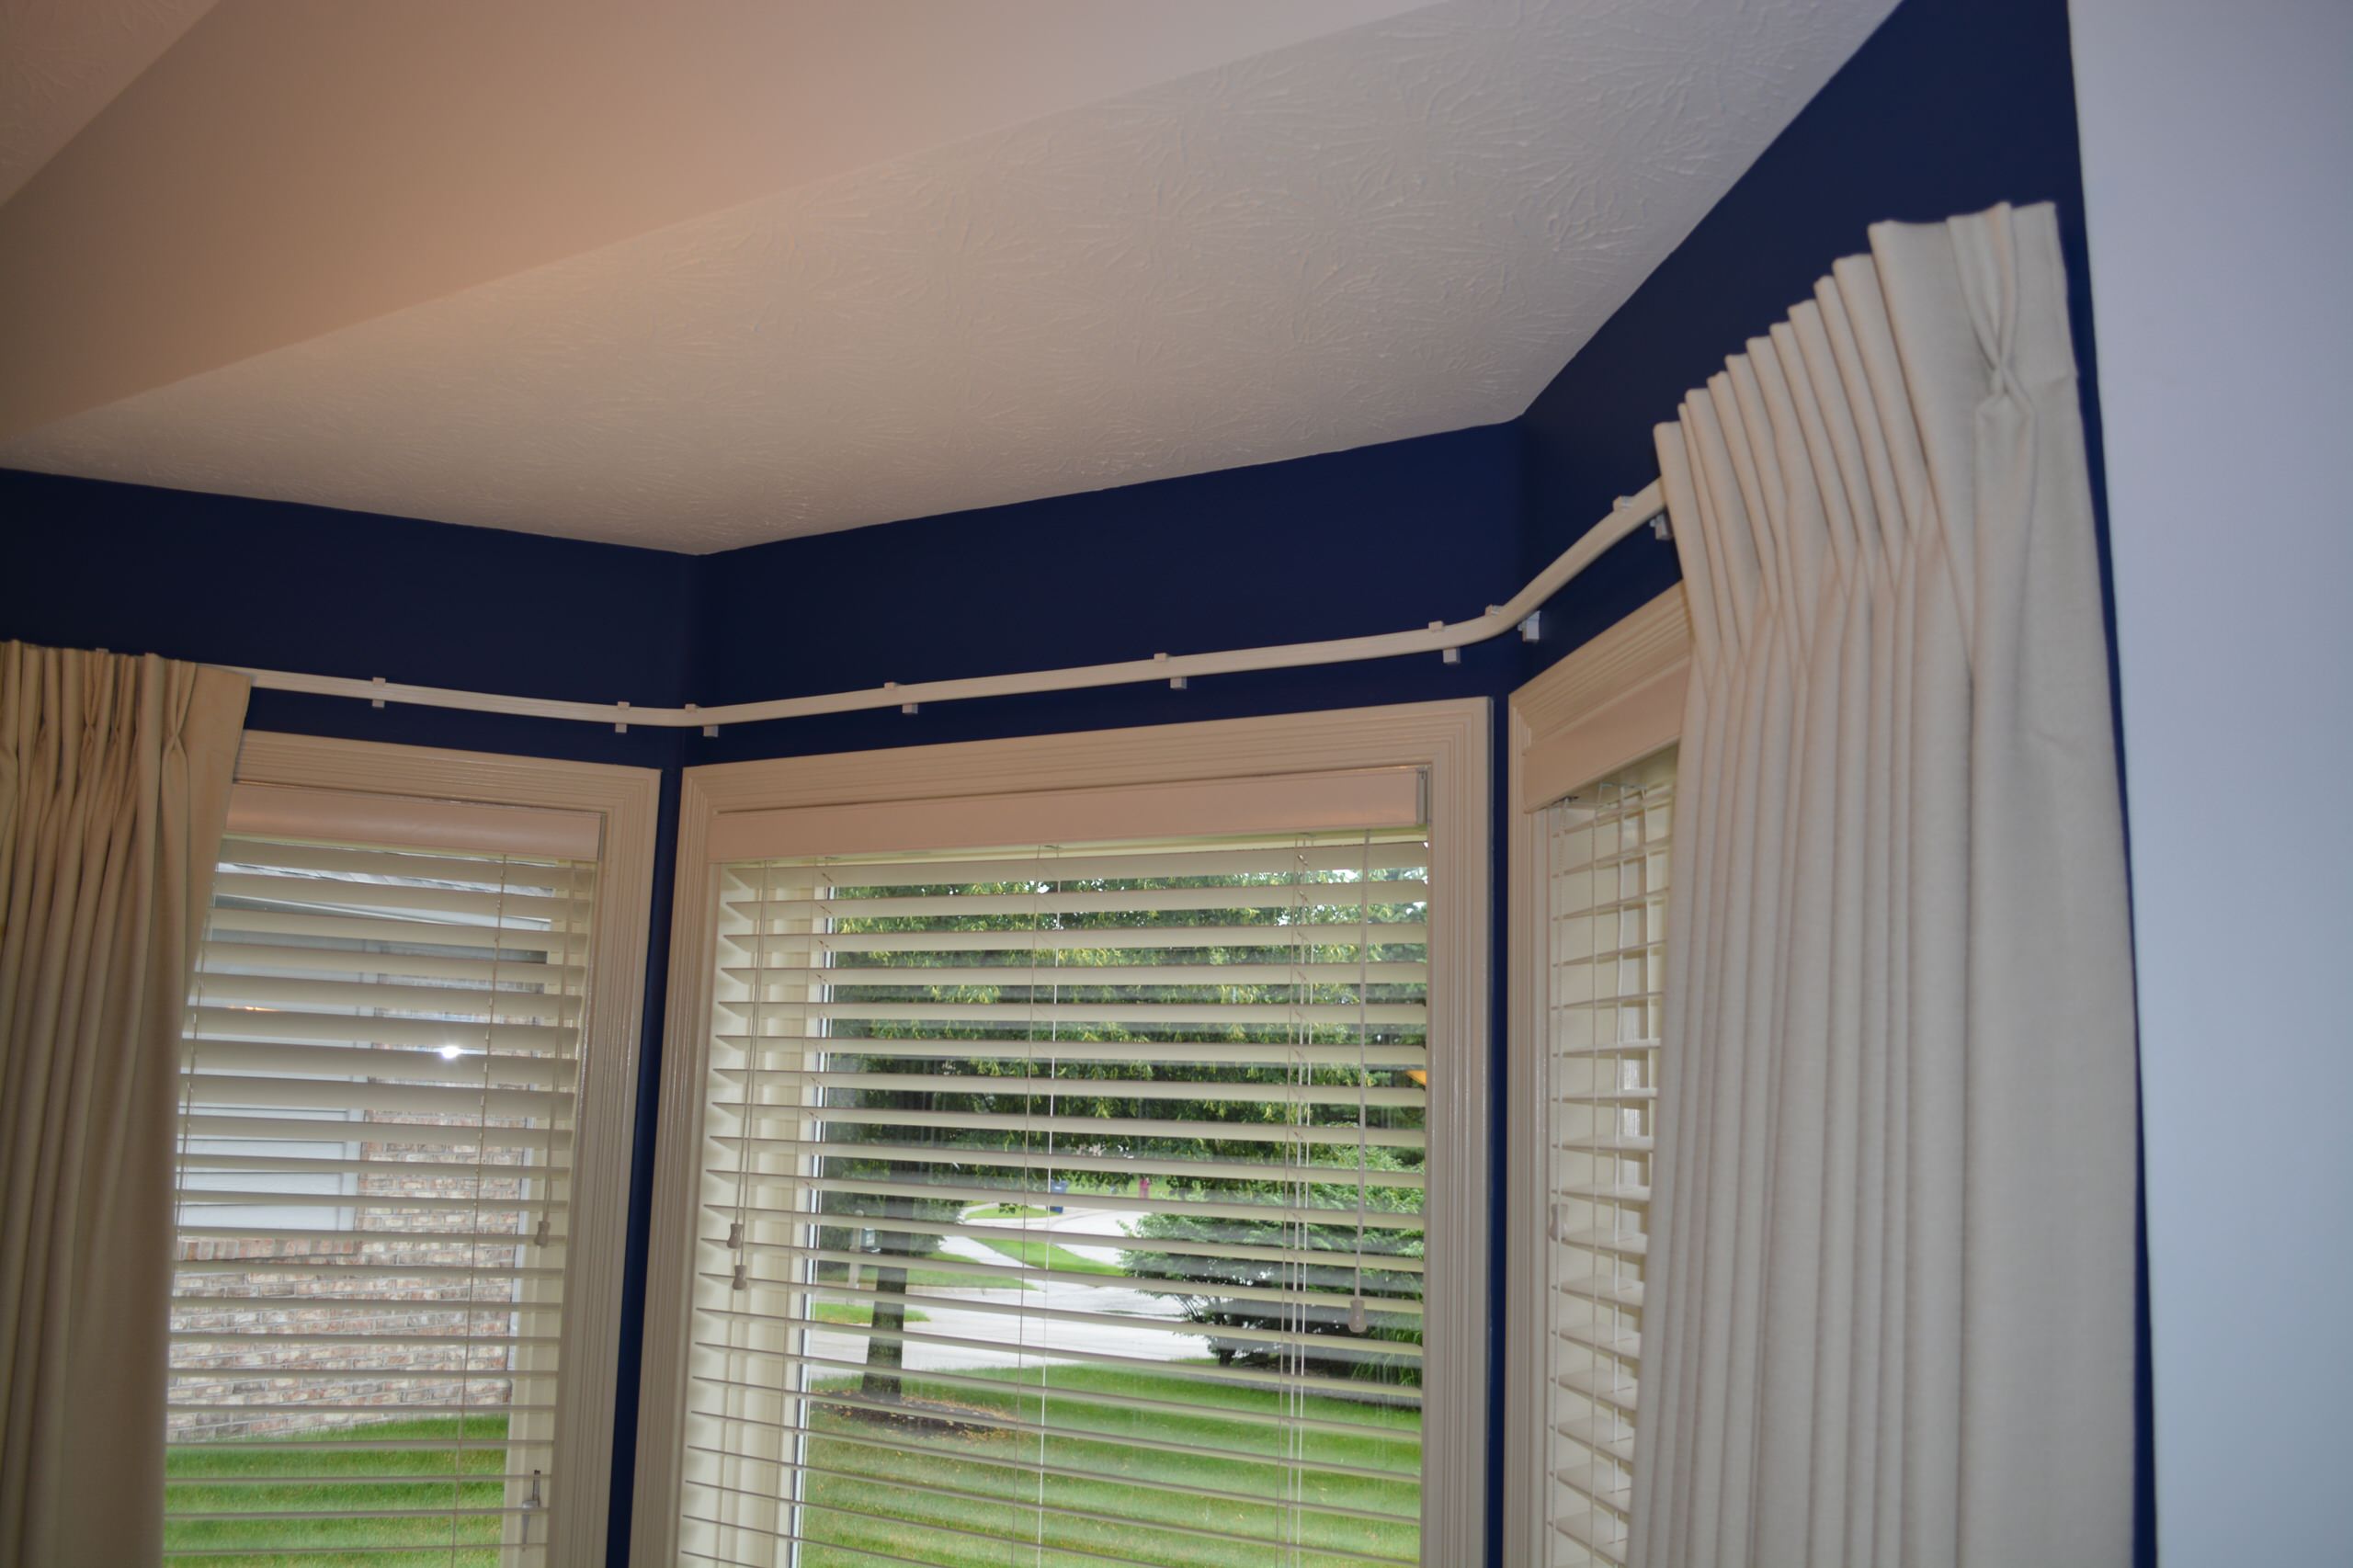 Flexible Rod For Bay Windows, Flexible Curtain Rods For Bow Windows